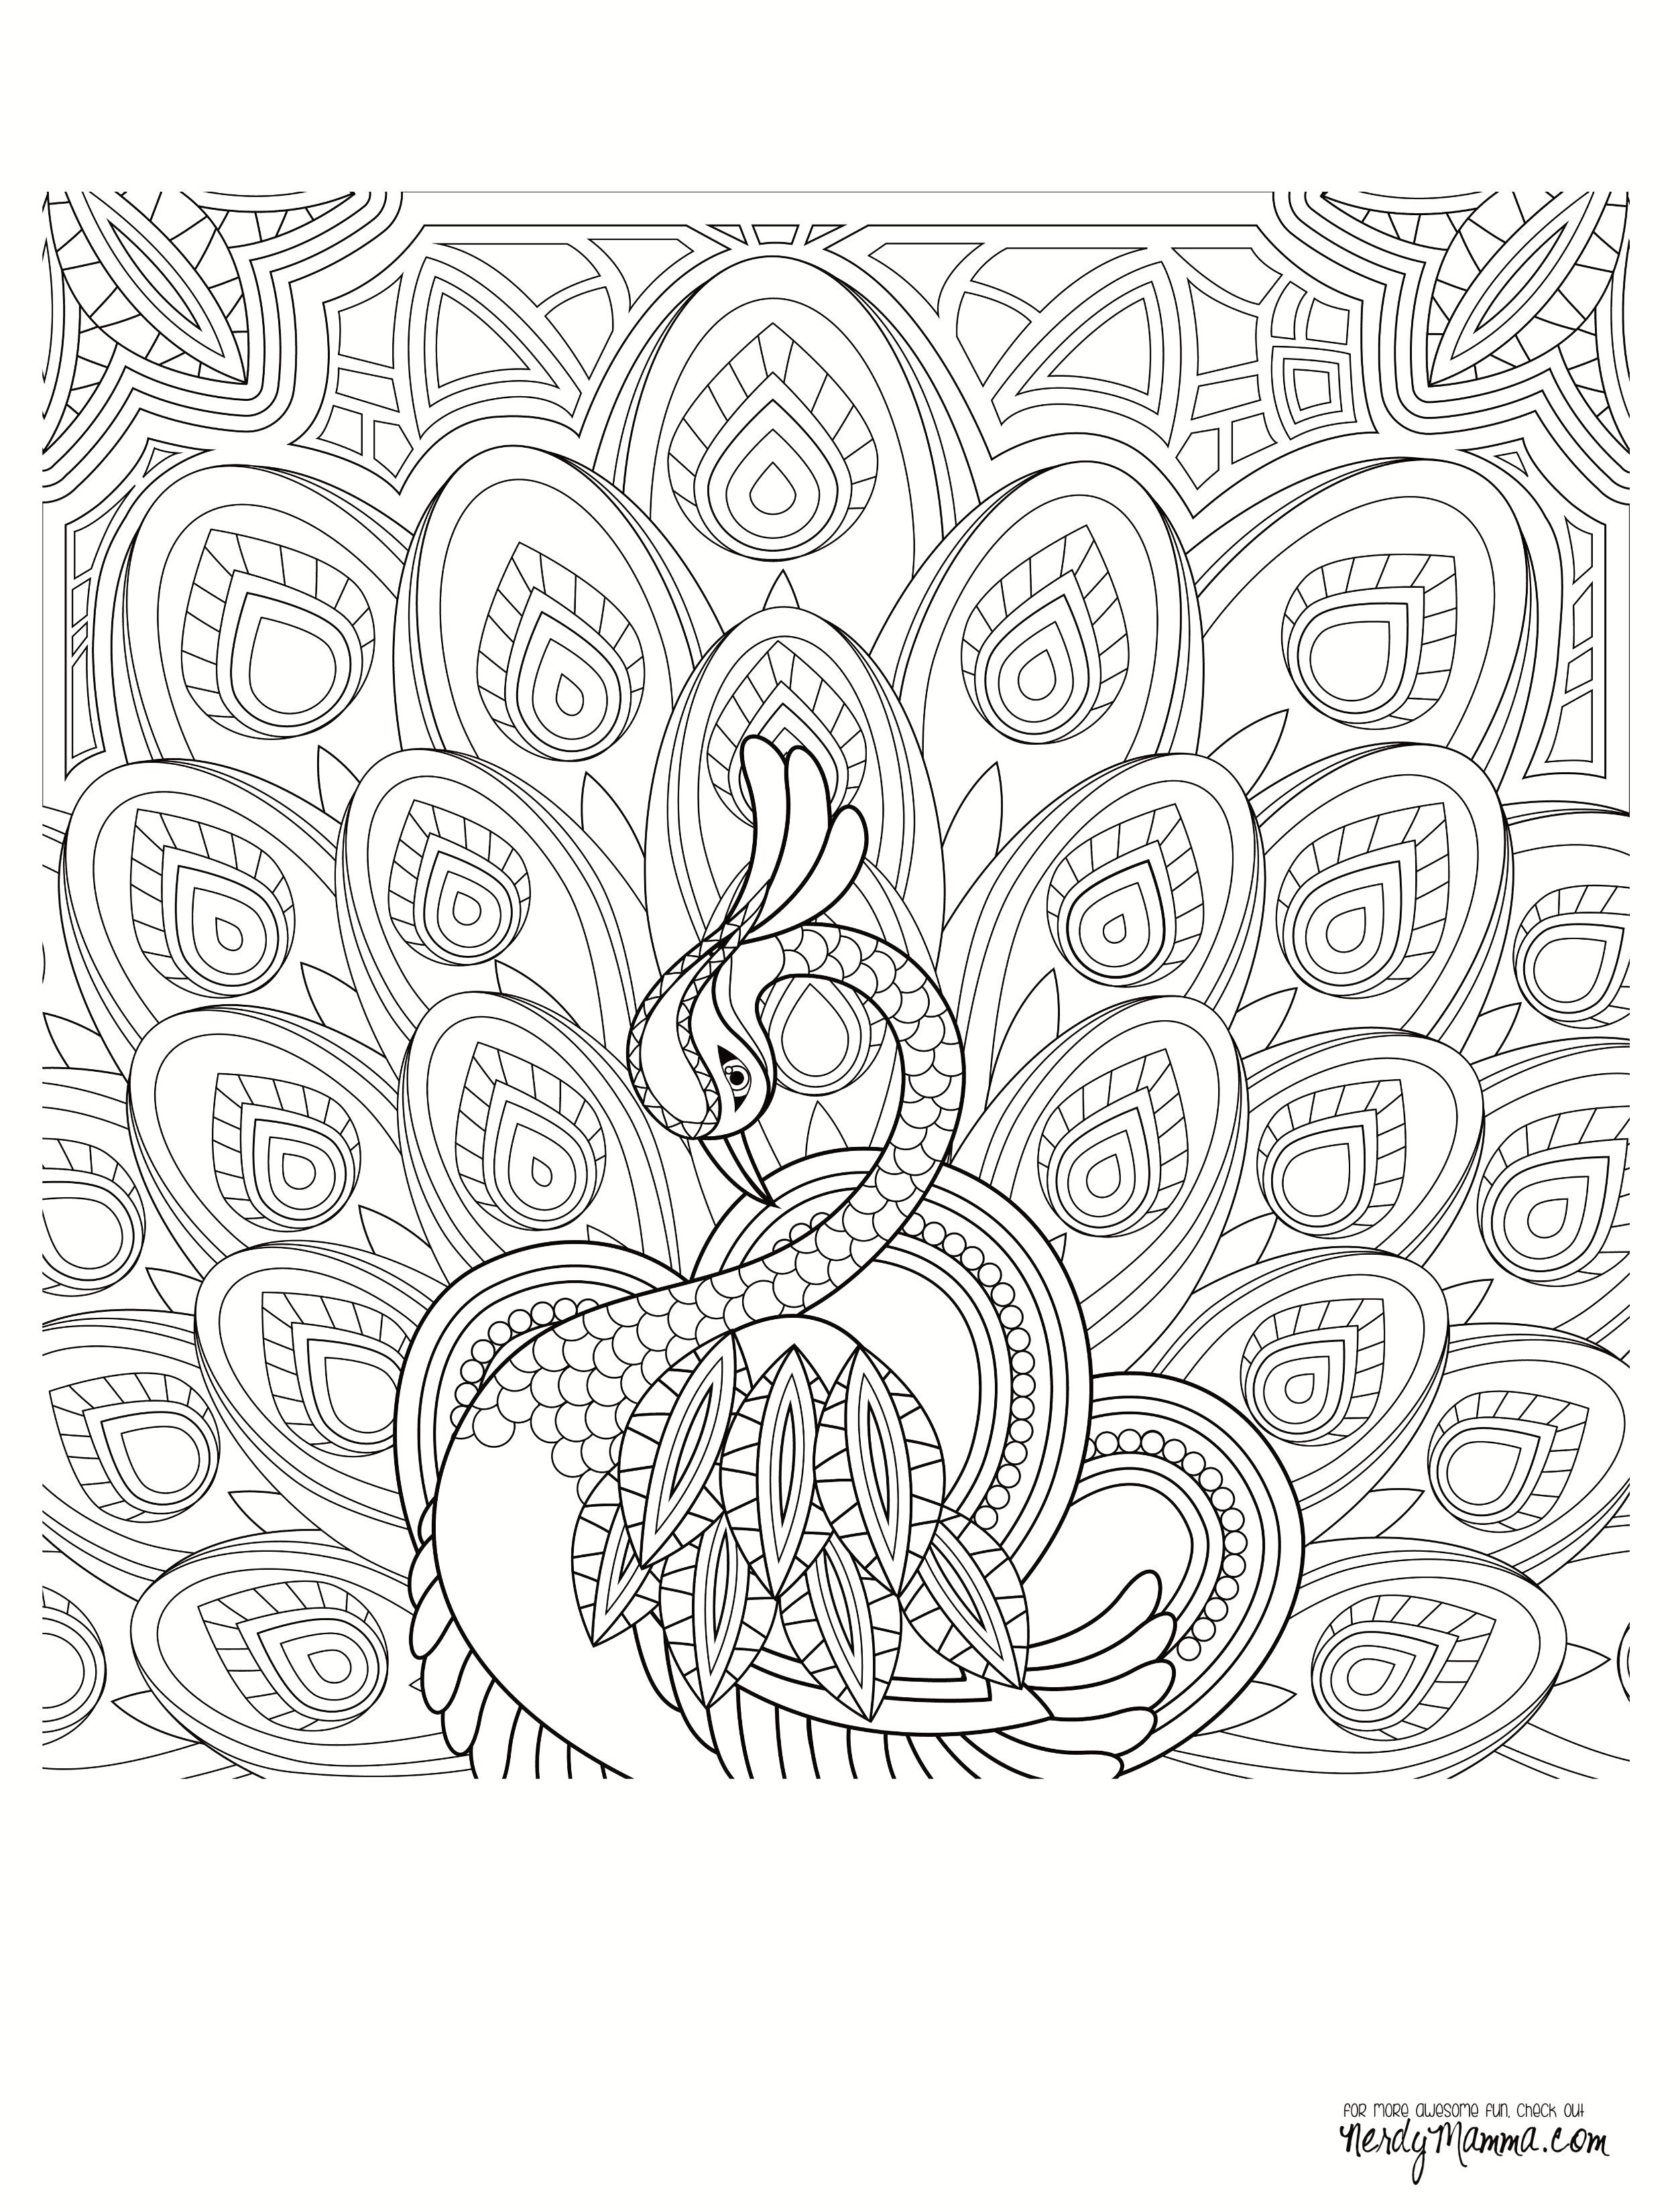 printable mitten coloring page fresh free coloring pages mittens lovely cat printable coloring pages of printable